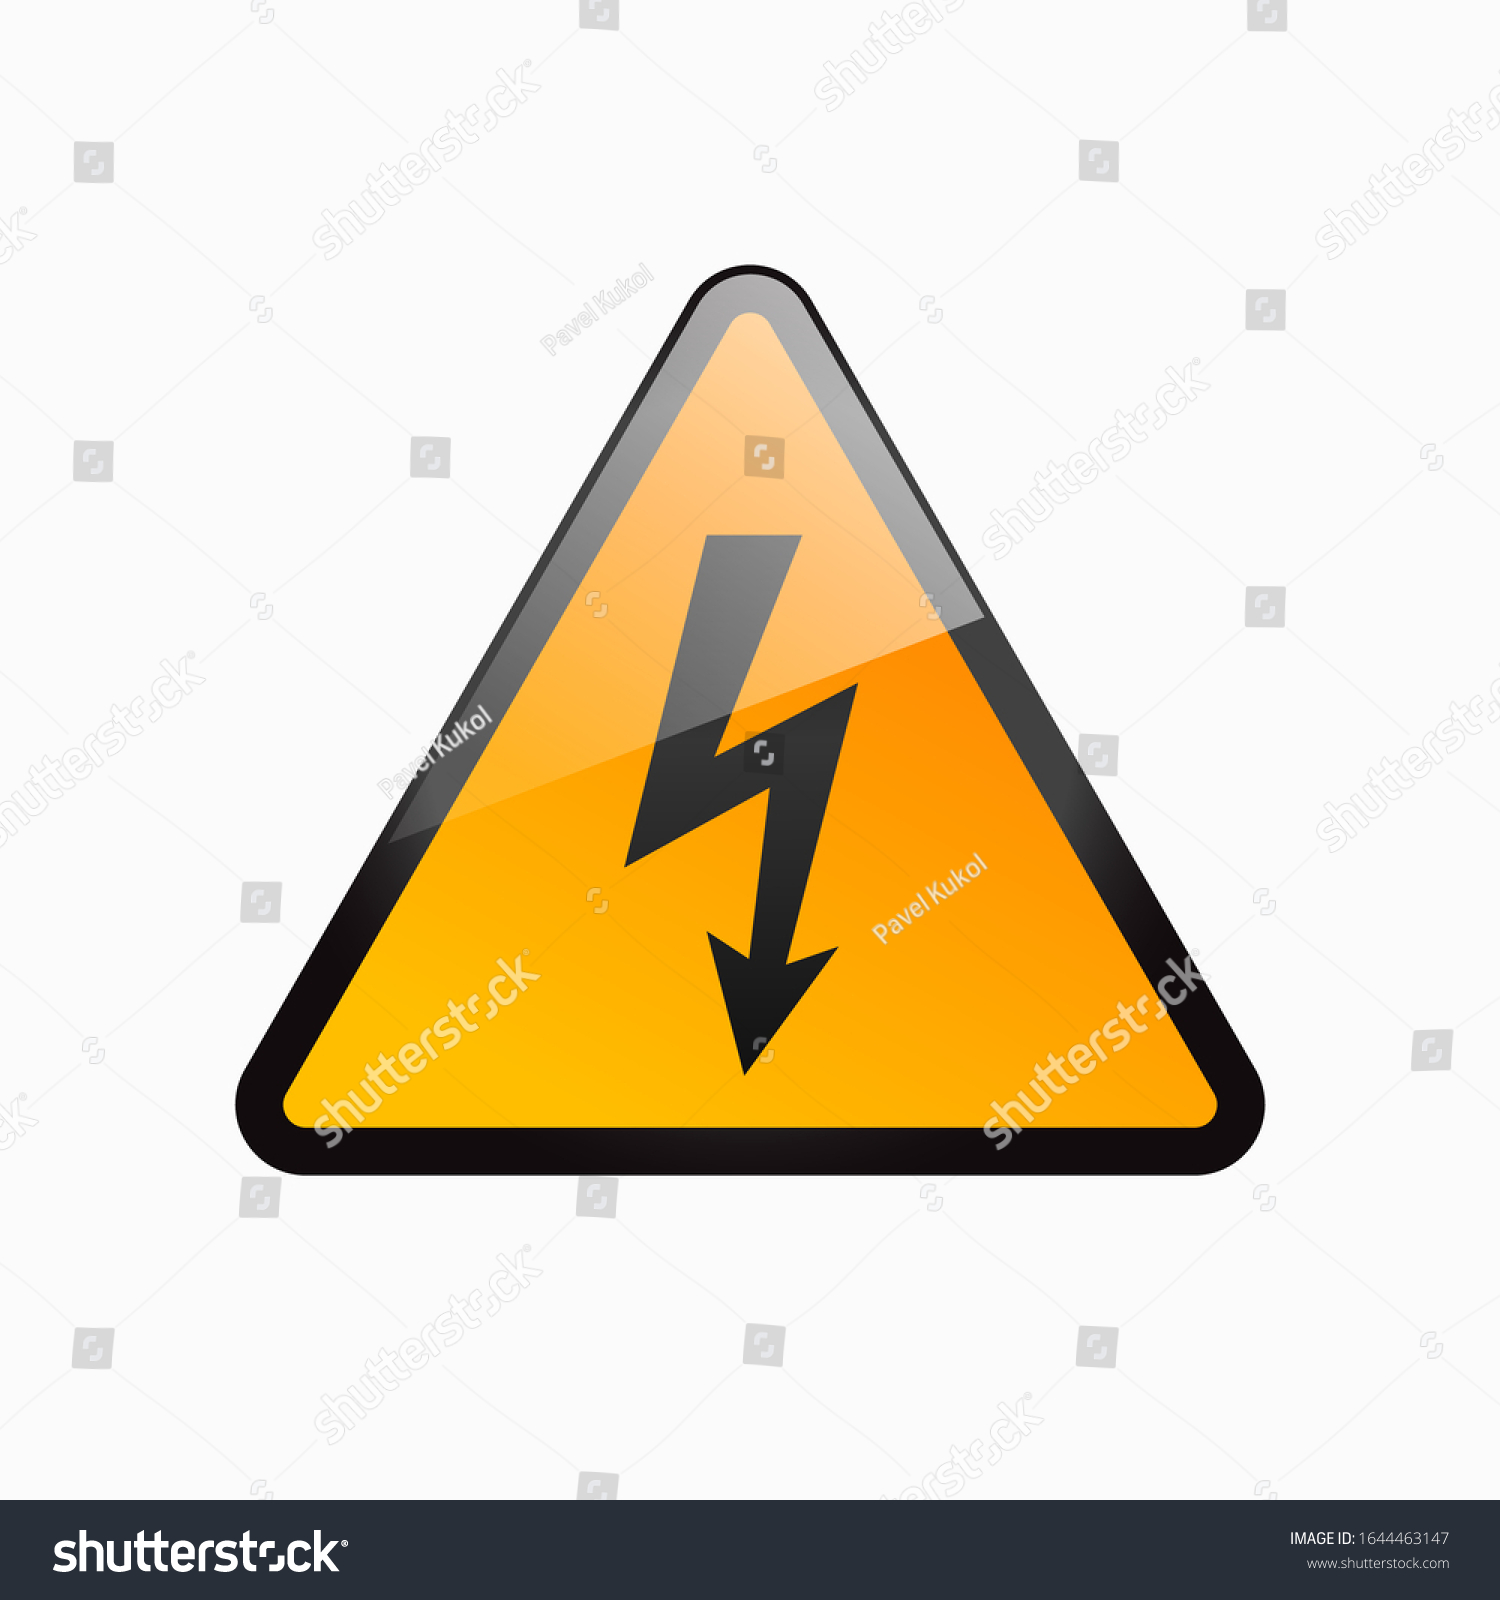 High voltage Electric Attention, danger, caution - Royalty Free Stock ...